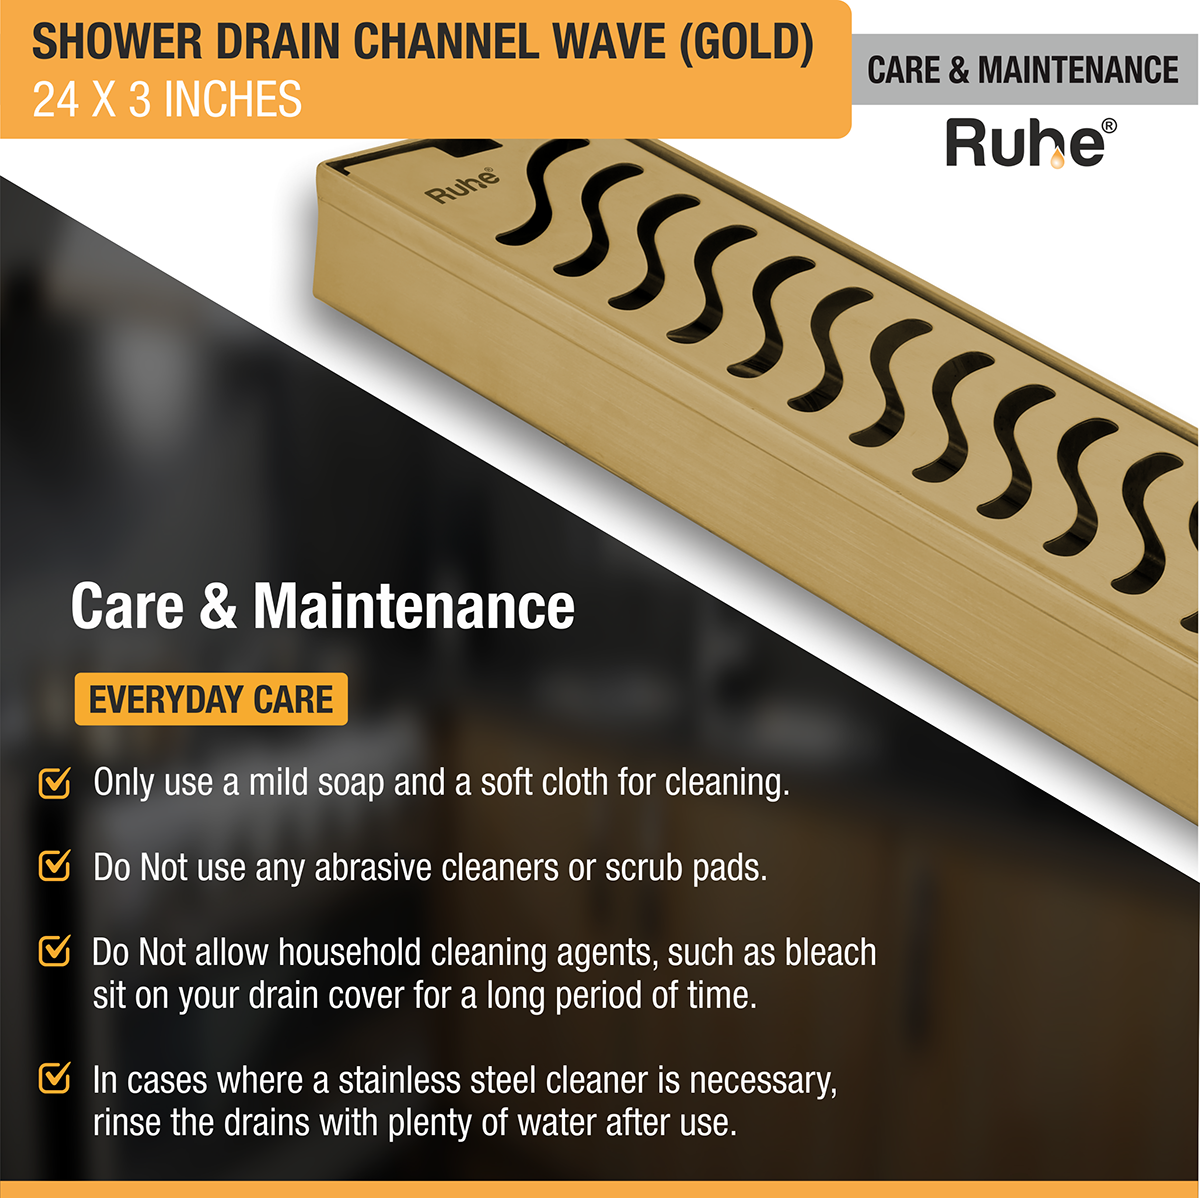 Wave Shower Drain Channel (24 x 3 Inches) YELLOW GOLD care and maintenance